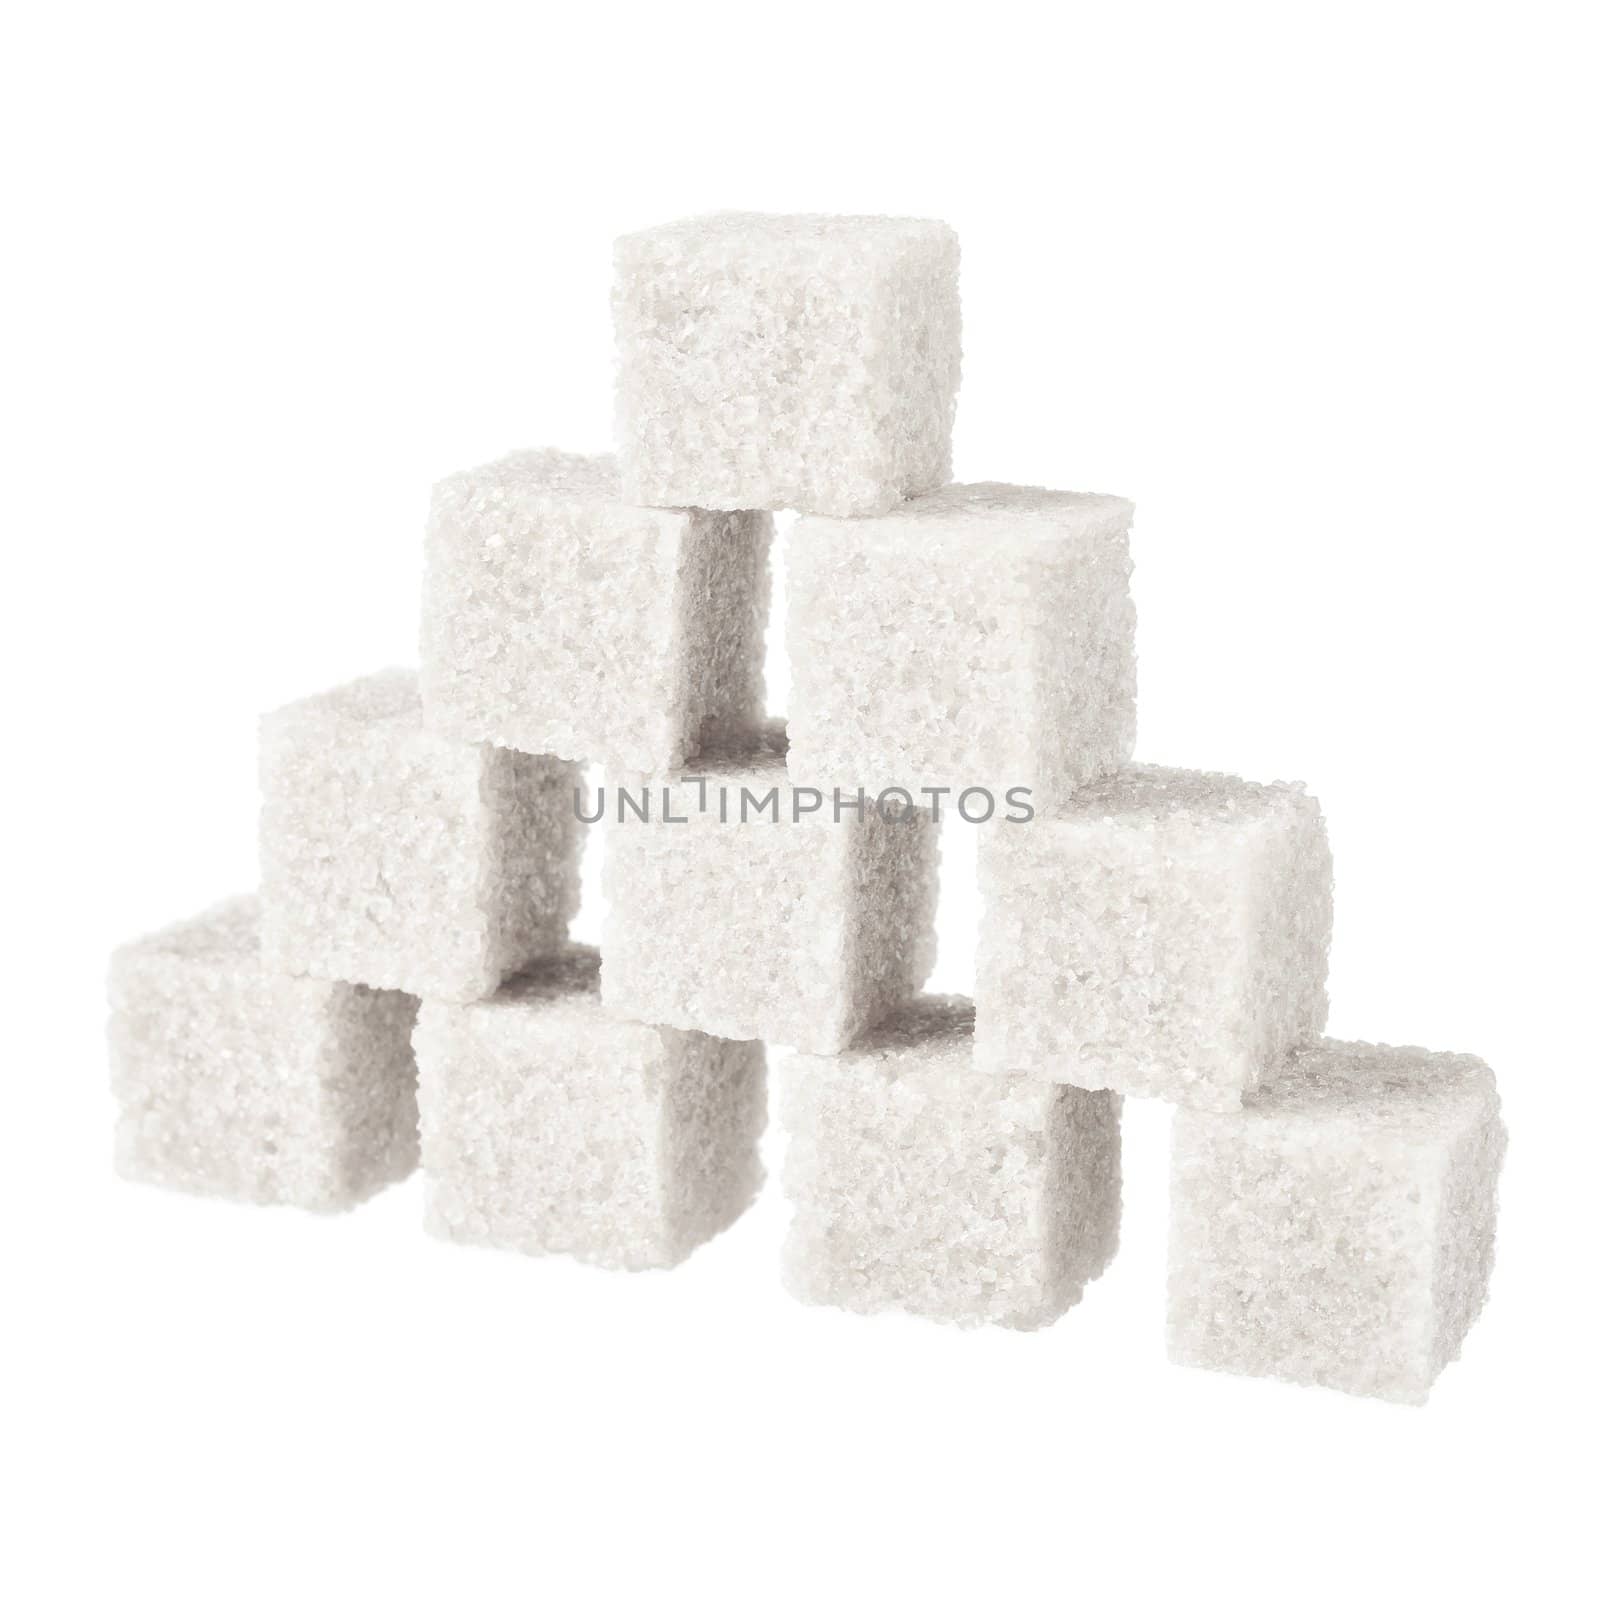 Sugar, a few pieces. Isolated on white.